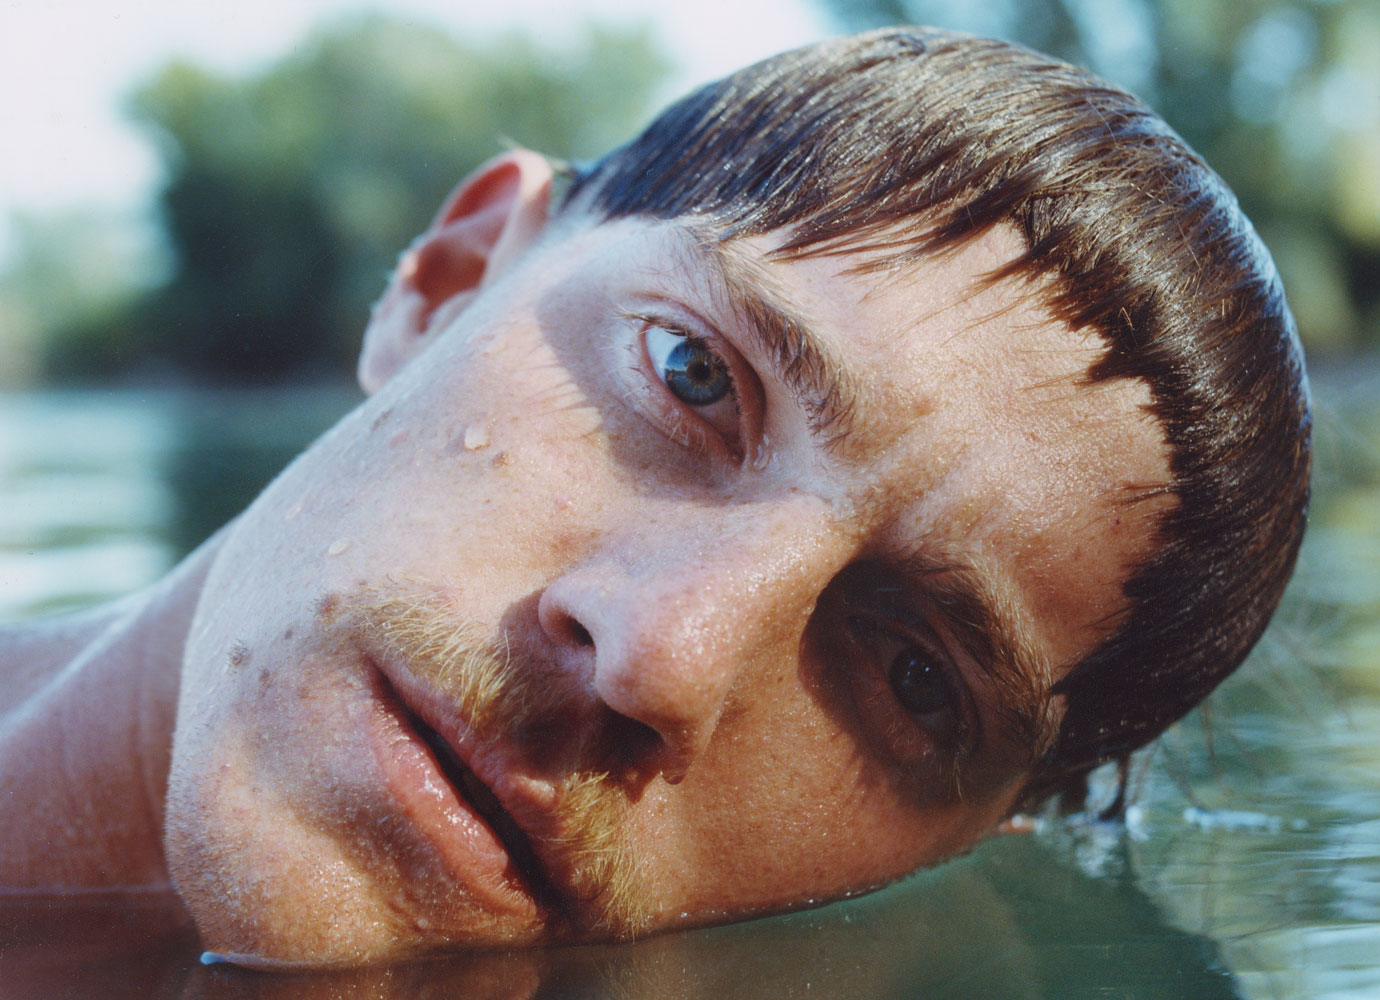 András Ladocsi’s meditative photographs relive the joys of competitive swimming 